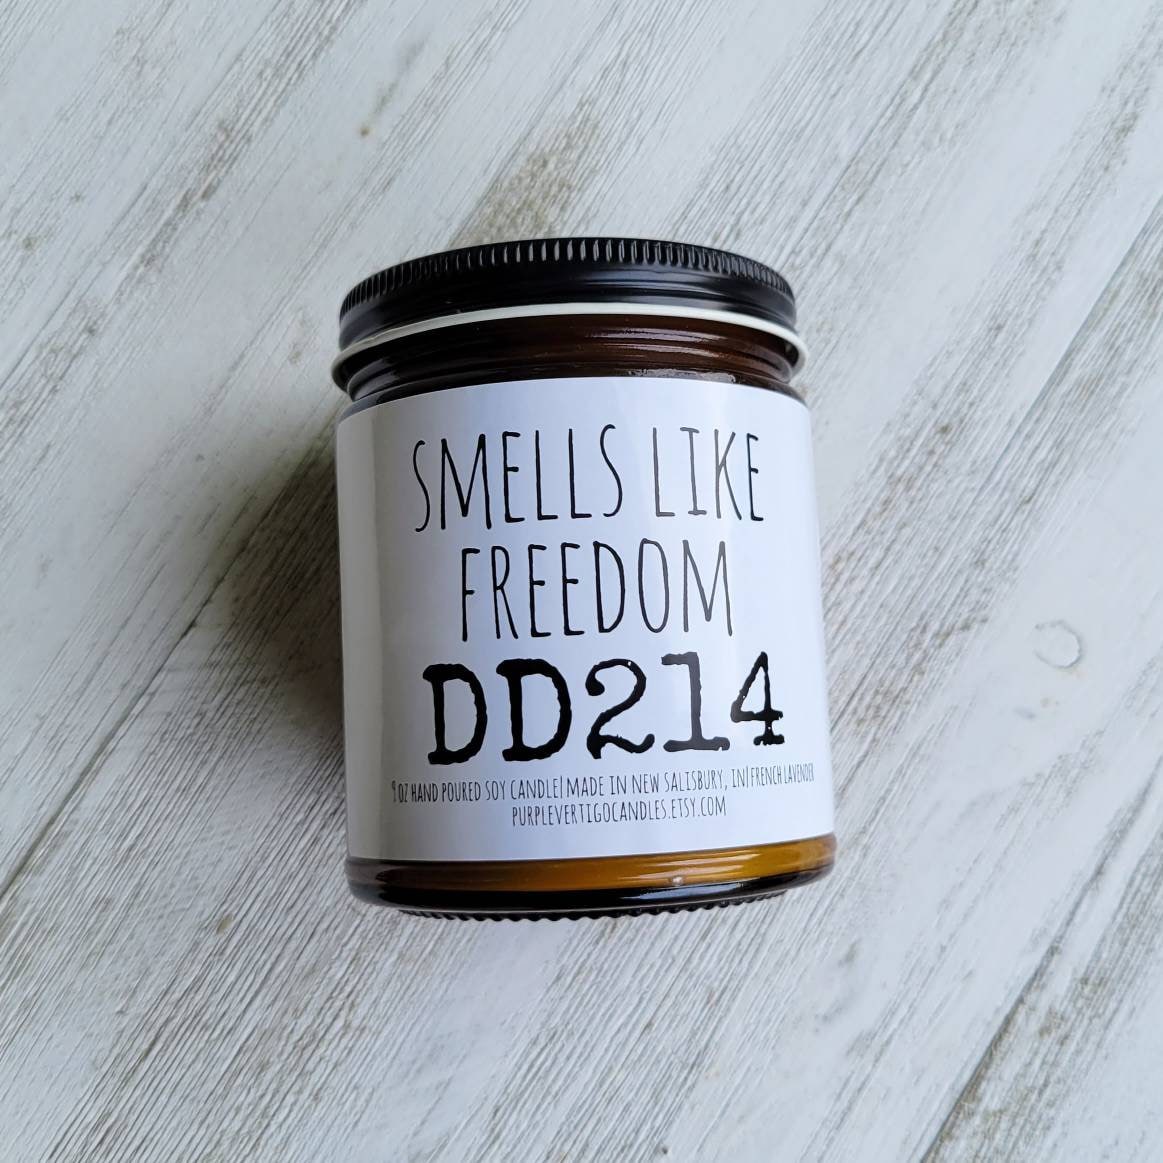 NEW AIRPLANE SMELL Leather & Freedom: Airplane Candle, Scented Candle,  Pilot Decor 